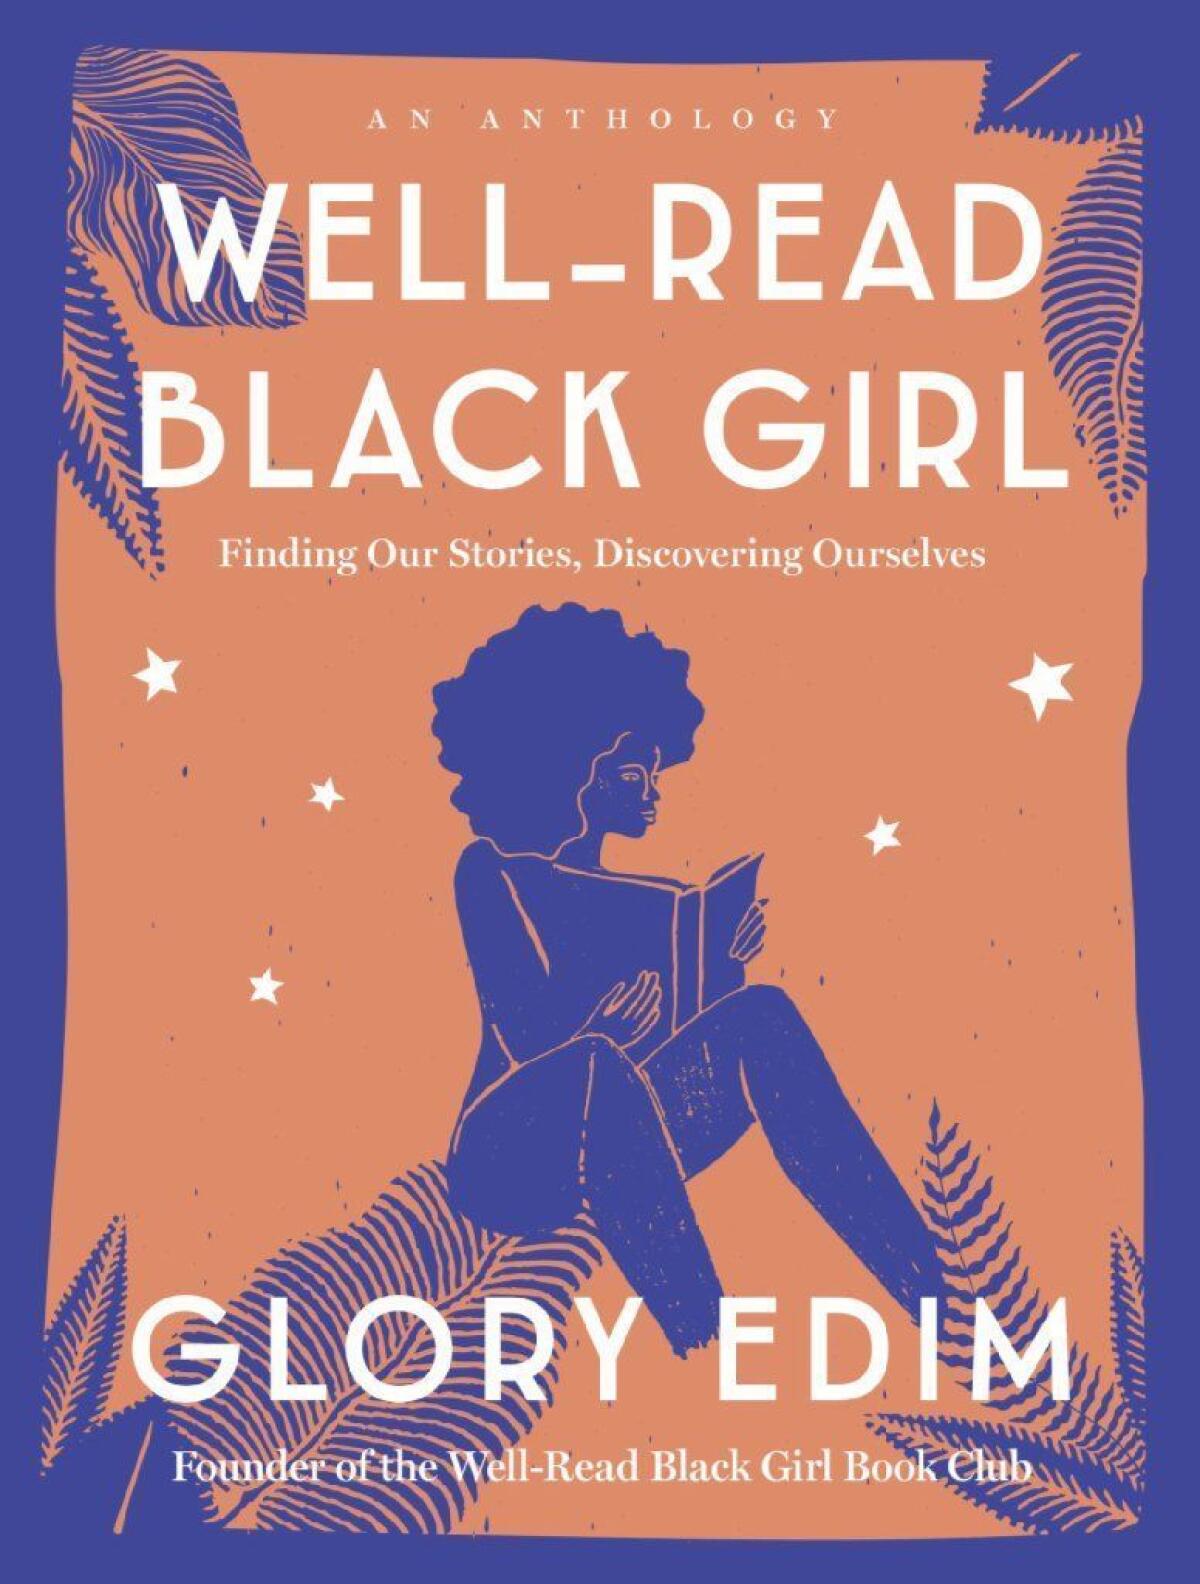 "Well-Read Black Girl: Finding our Stories, Discovering Ourselves"